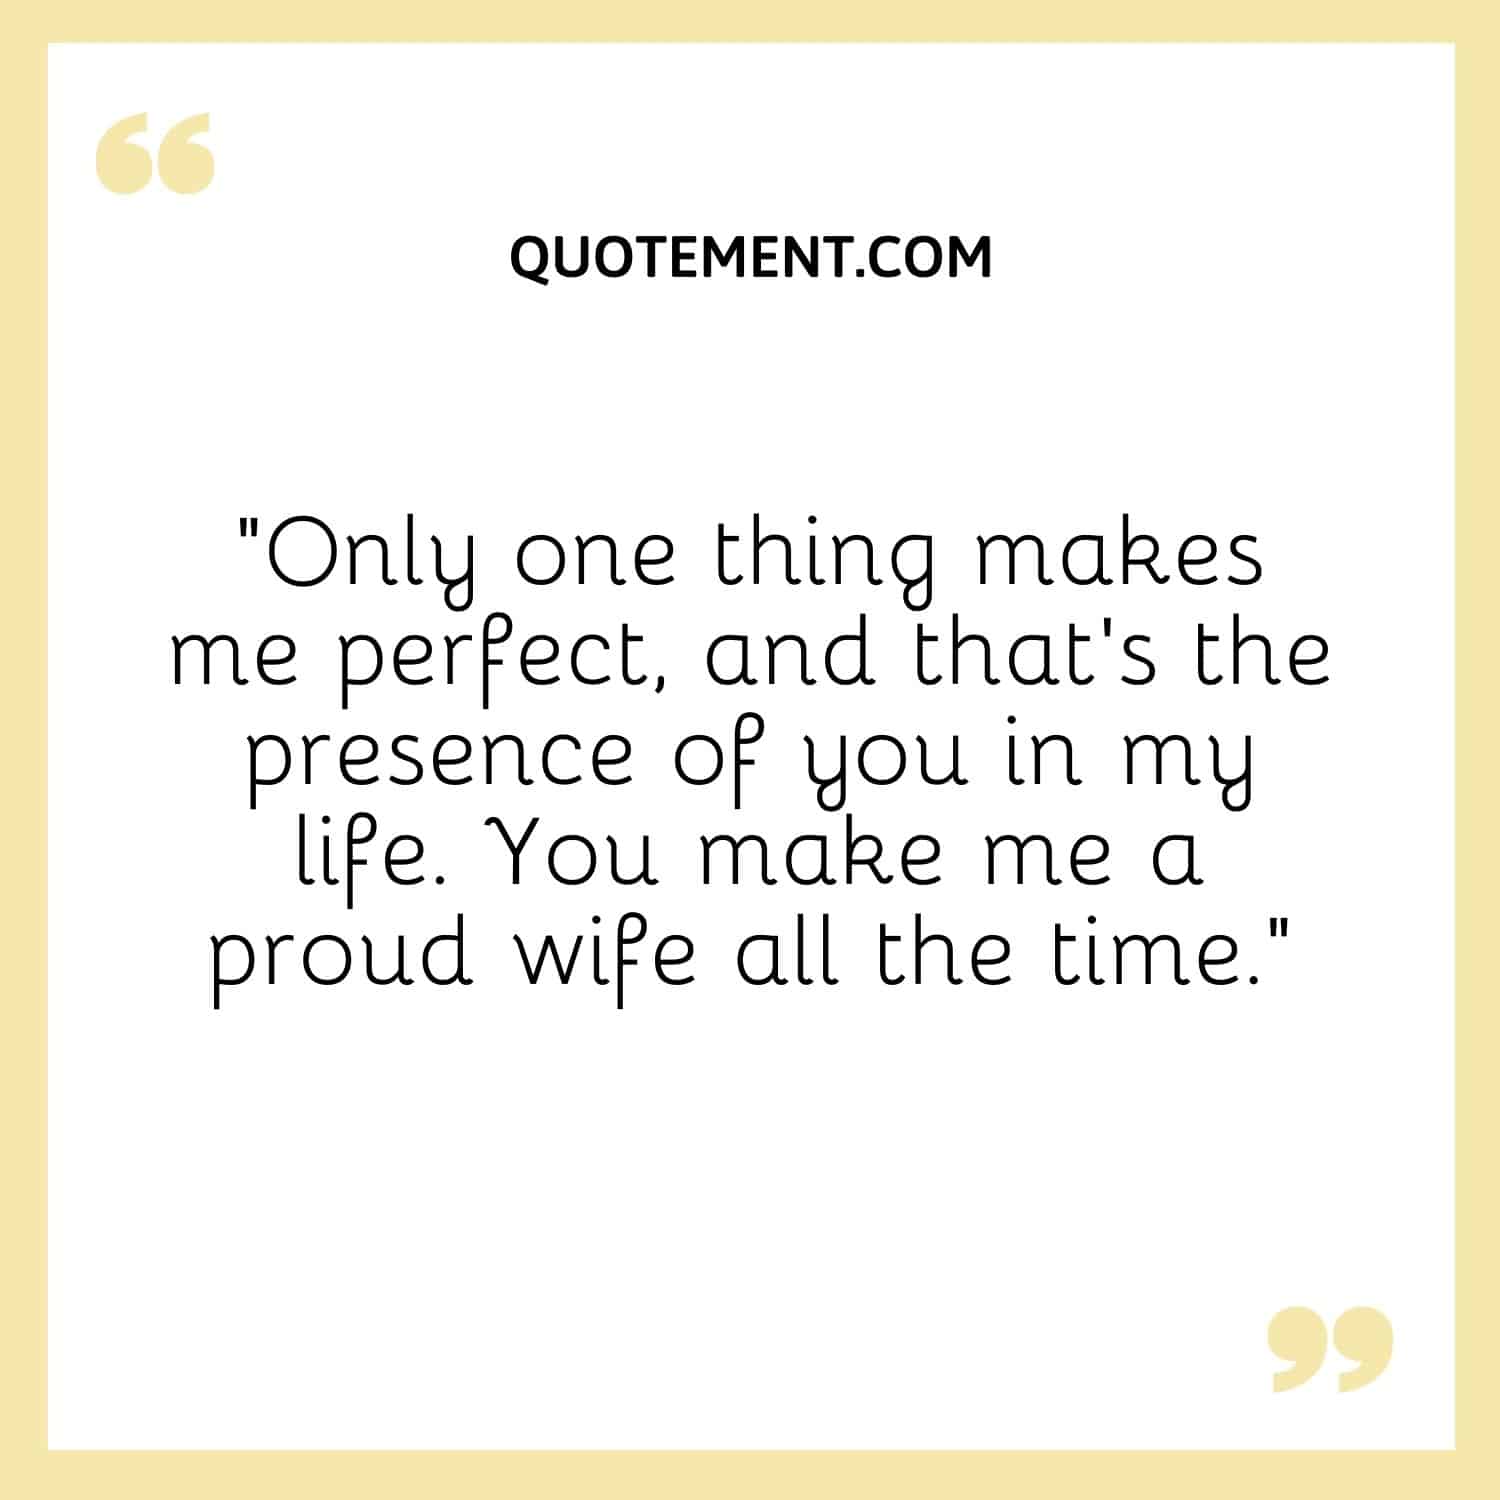 “Only one thing makes me perfect, and that’s the presence of you in my life. You make me a proud wife all the time.”